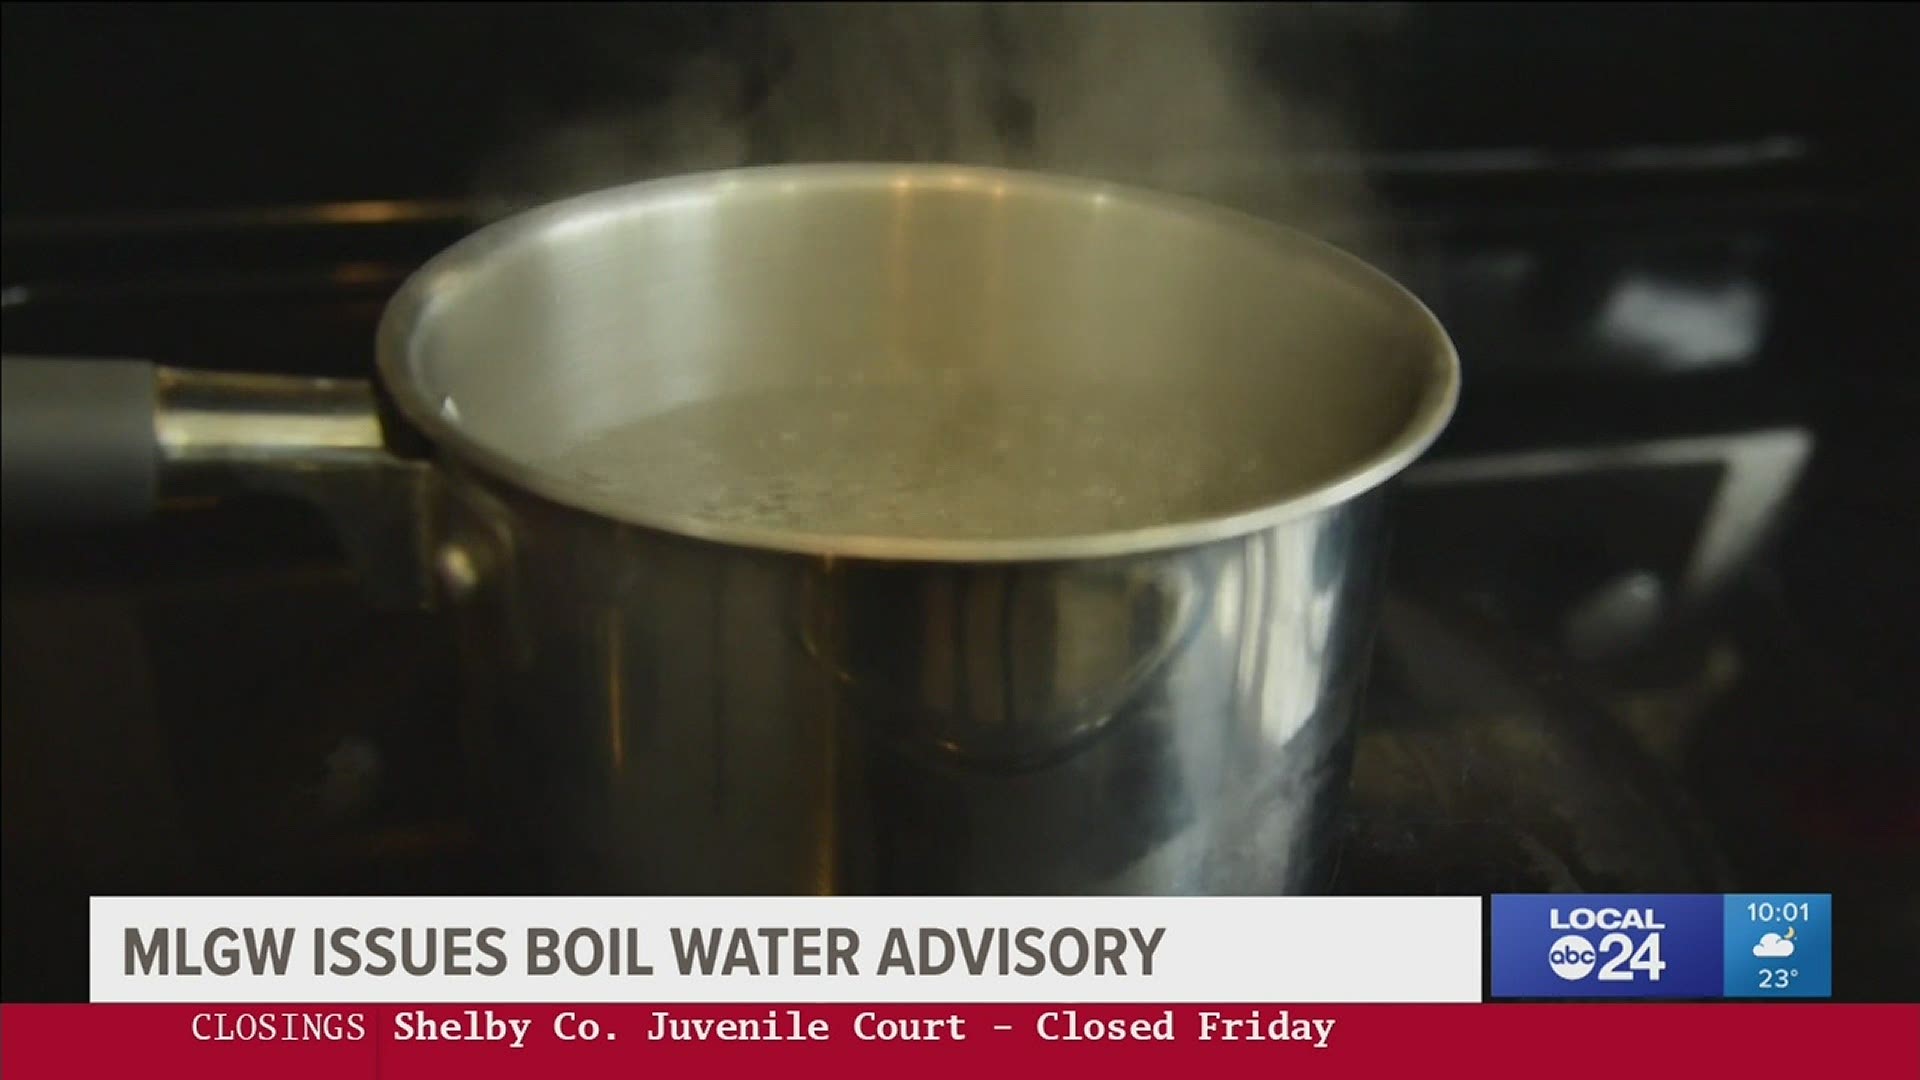 This Boiled Water Advisory includes all MLGW water customers in Shelby County. Some of the suburban cities are not included - they are on other water systems.